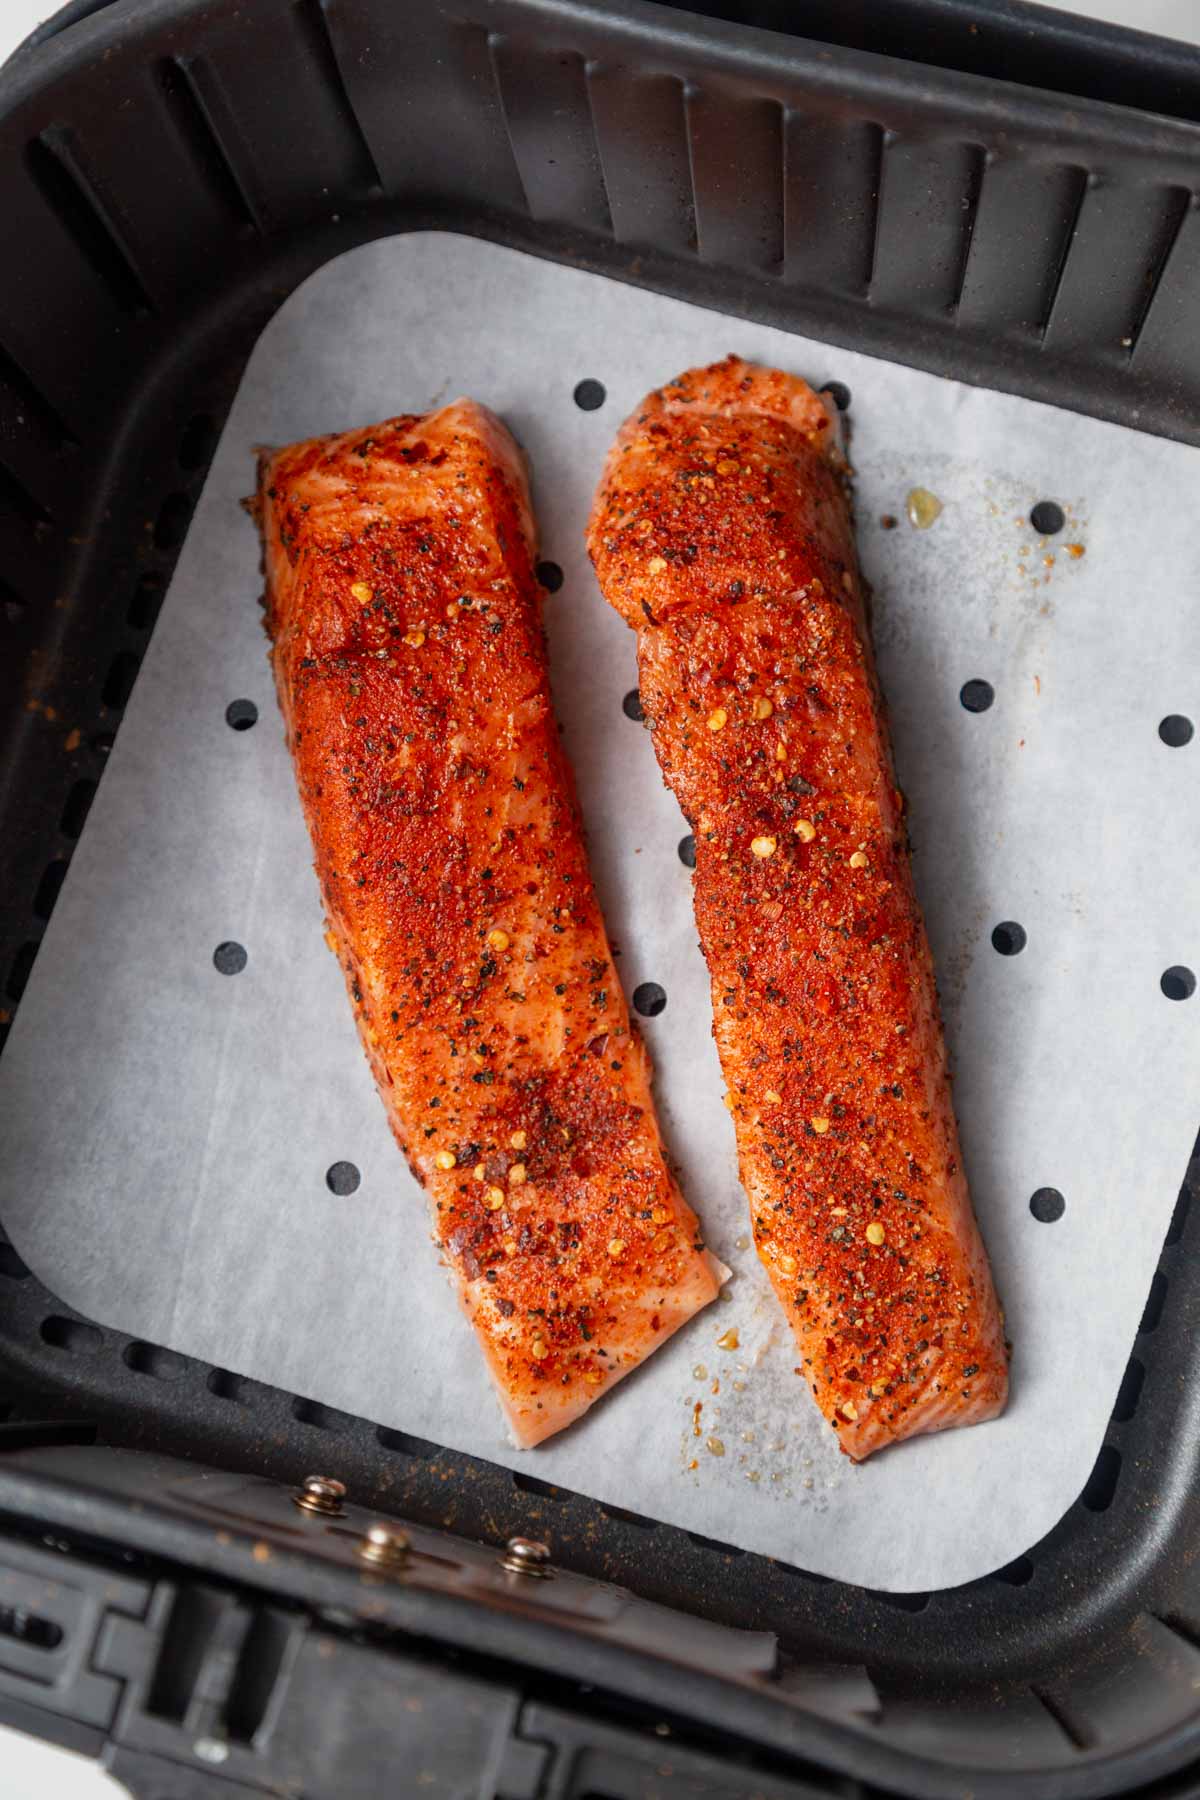 placing the seasoned salmon in the air fryer.